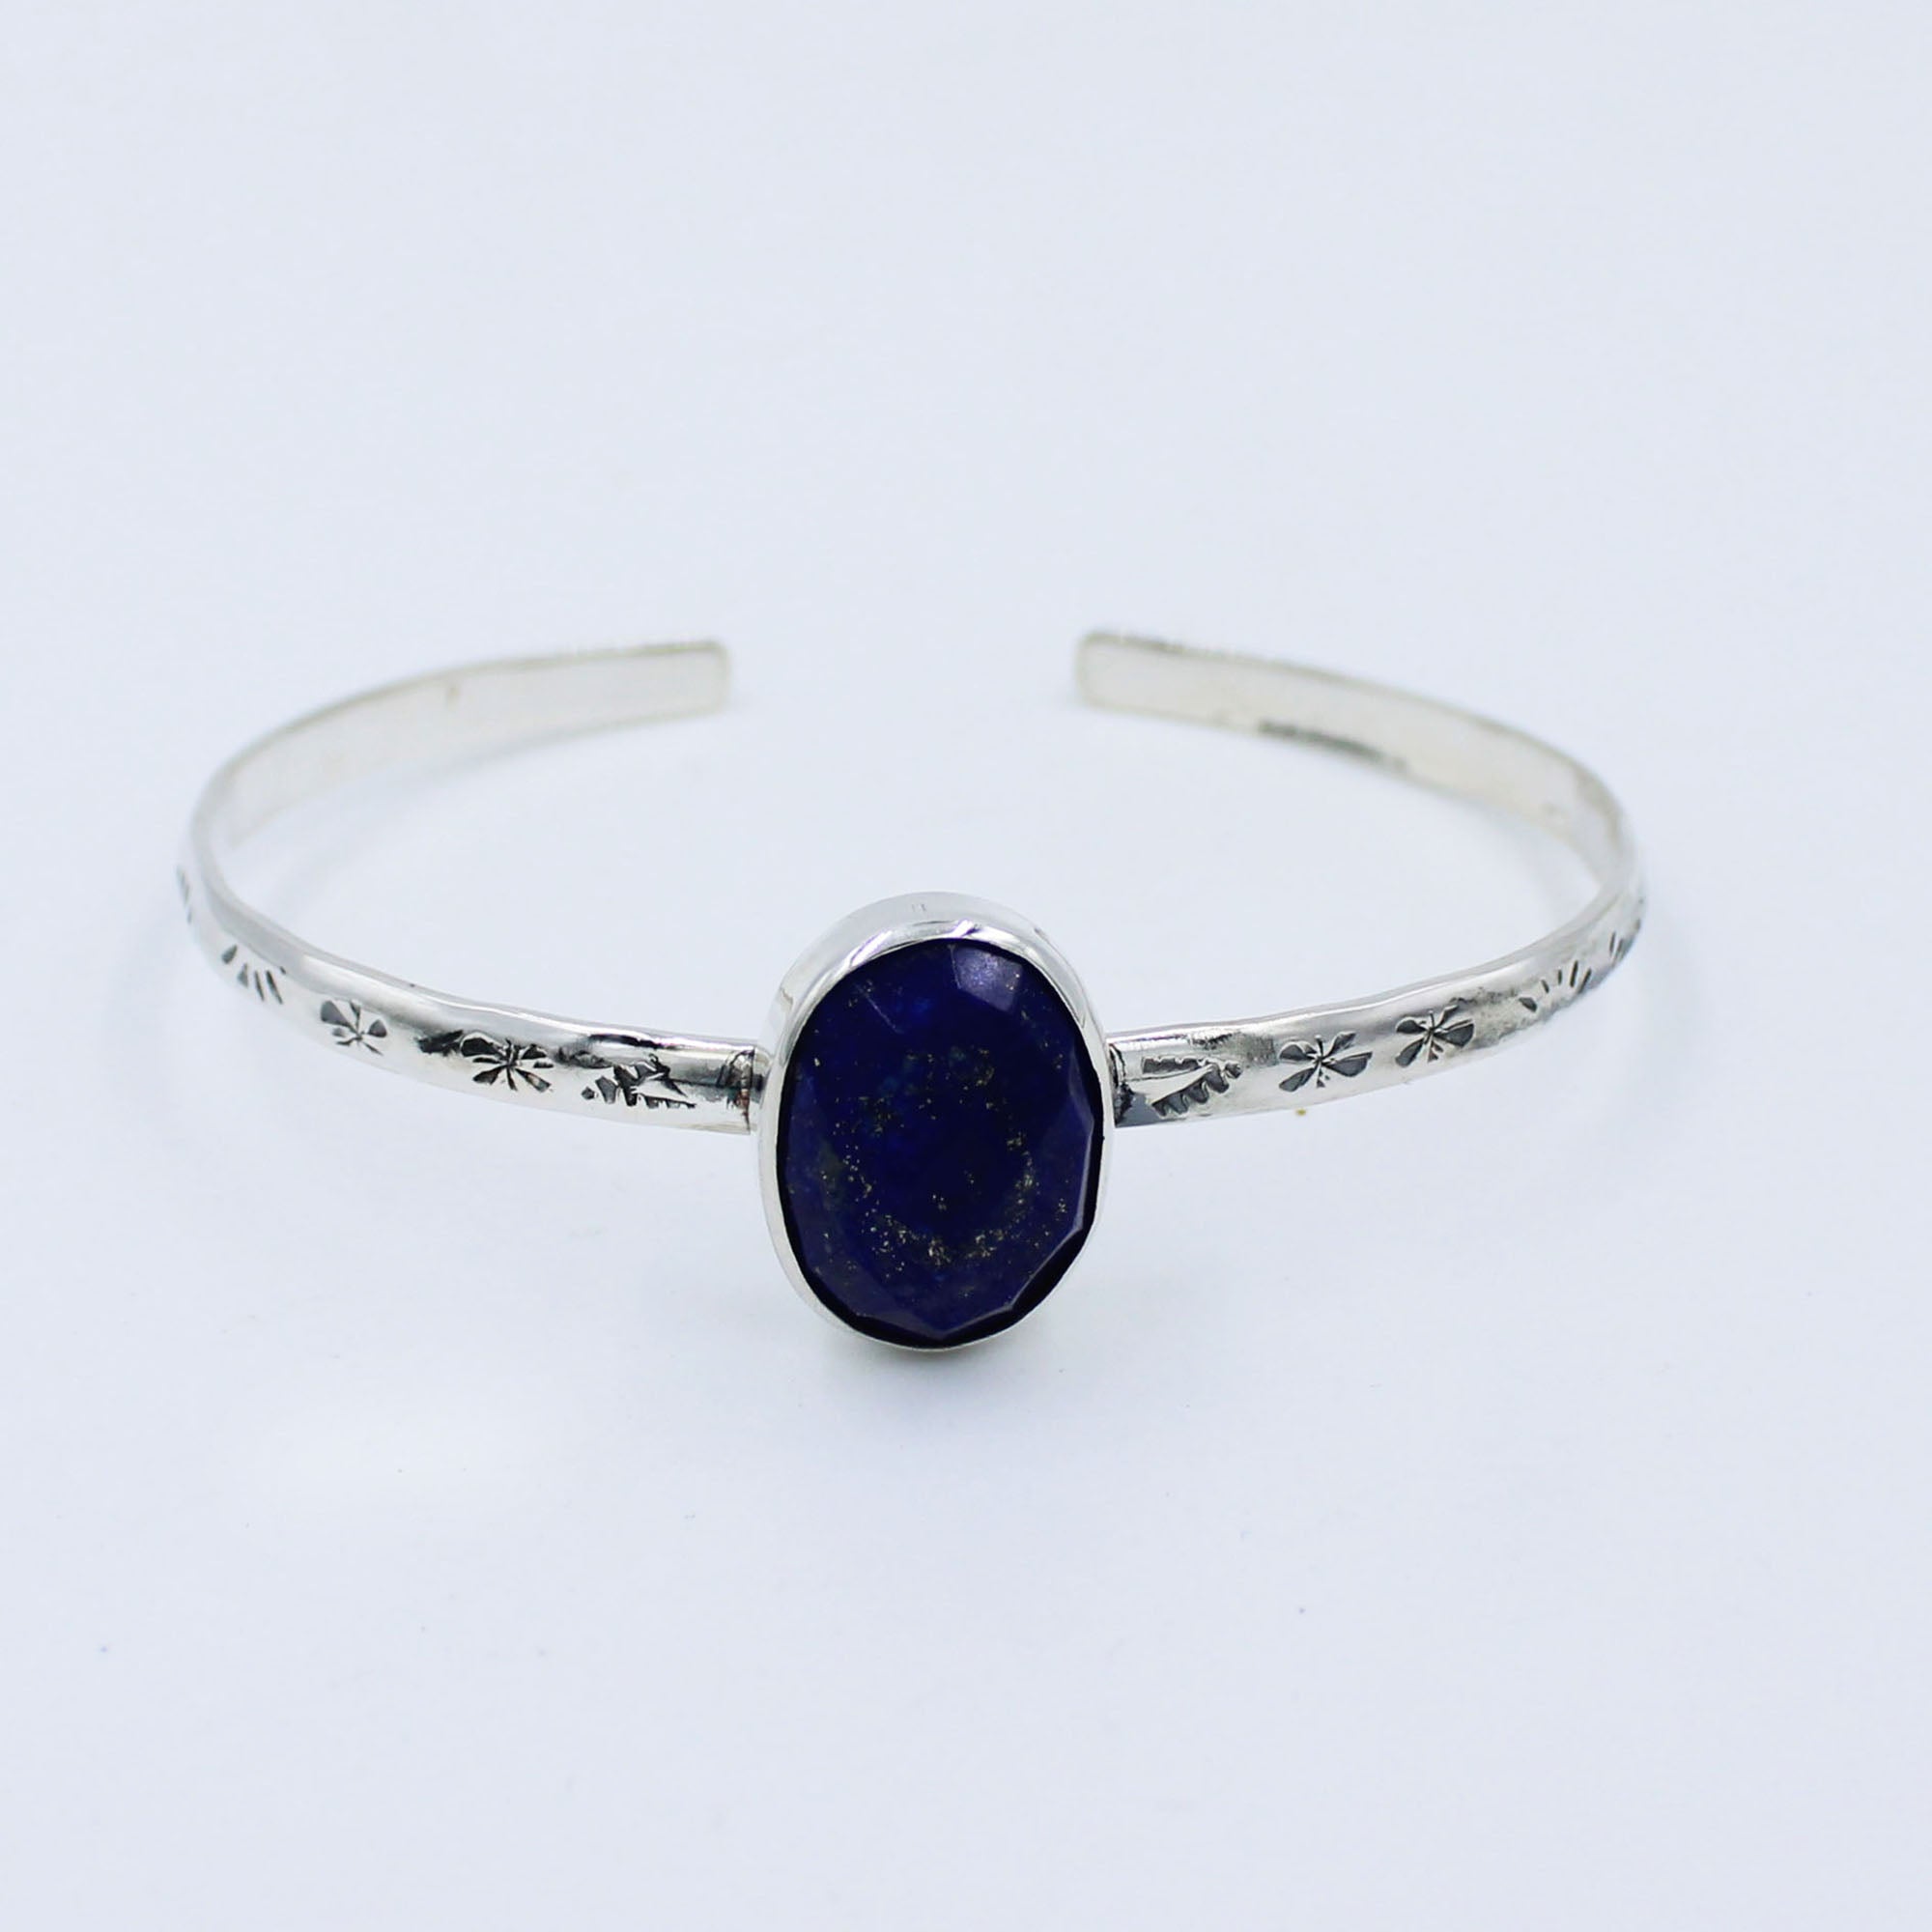 Faceted Lapis Lazuli 925 Sterling Silver Bangle